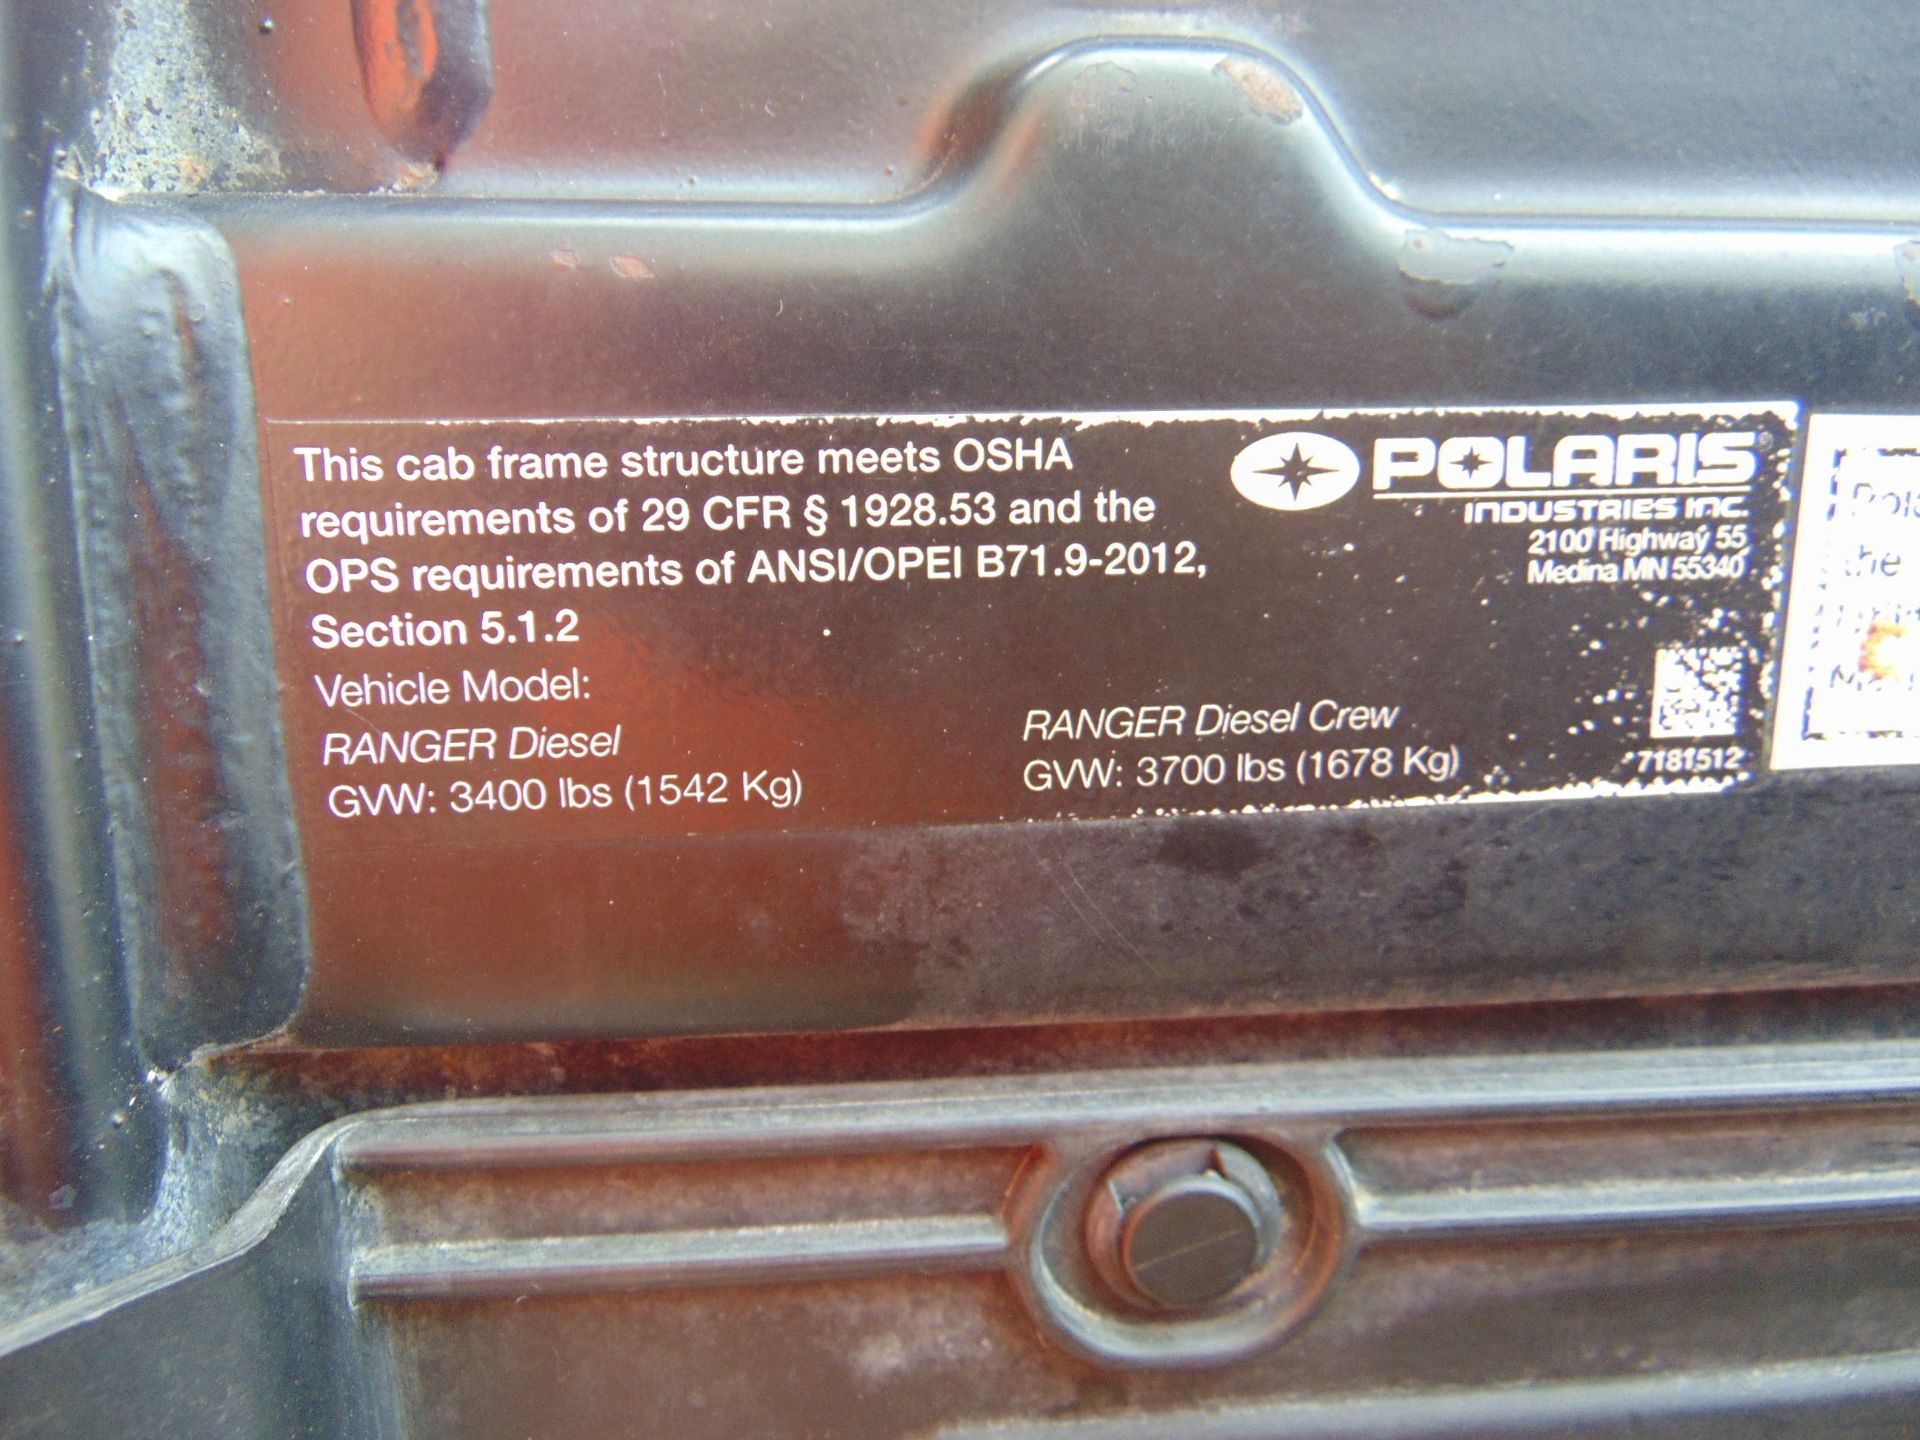 Polaris Ranger Crew Cab Diesel Utility Vehicle 1,190 Hrs only from Govt Dept - Image 16 of 25